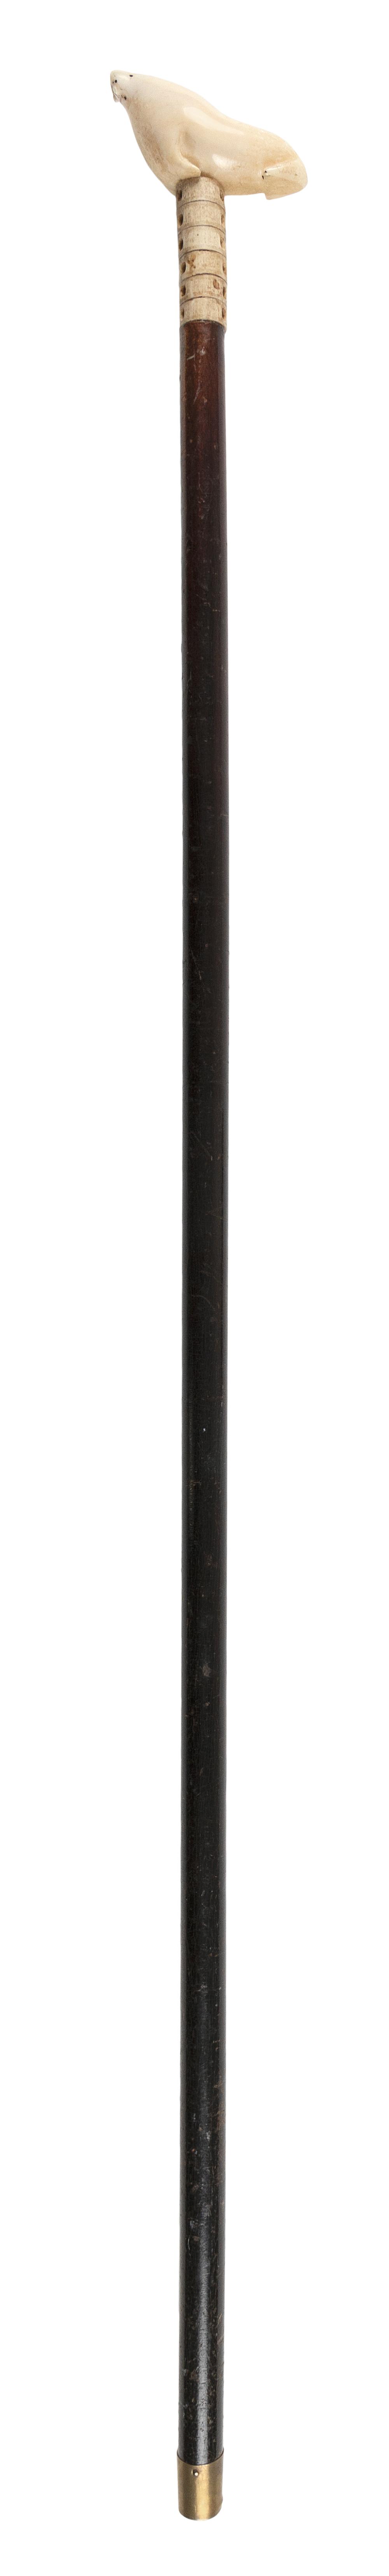 WALKING STICK WITH WALRUS FORM 34f029